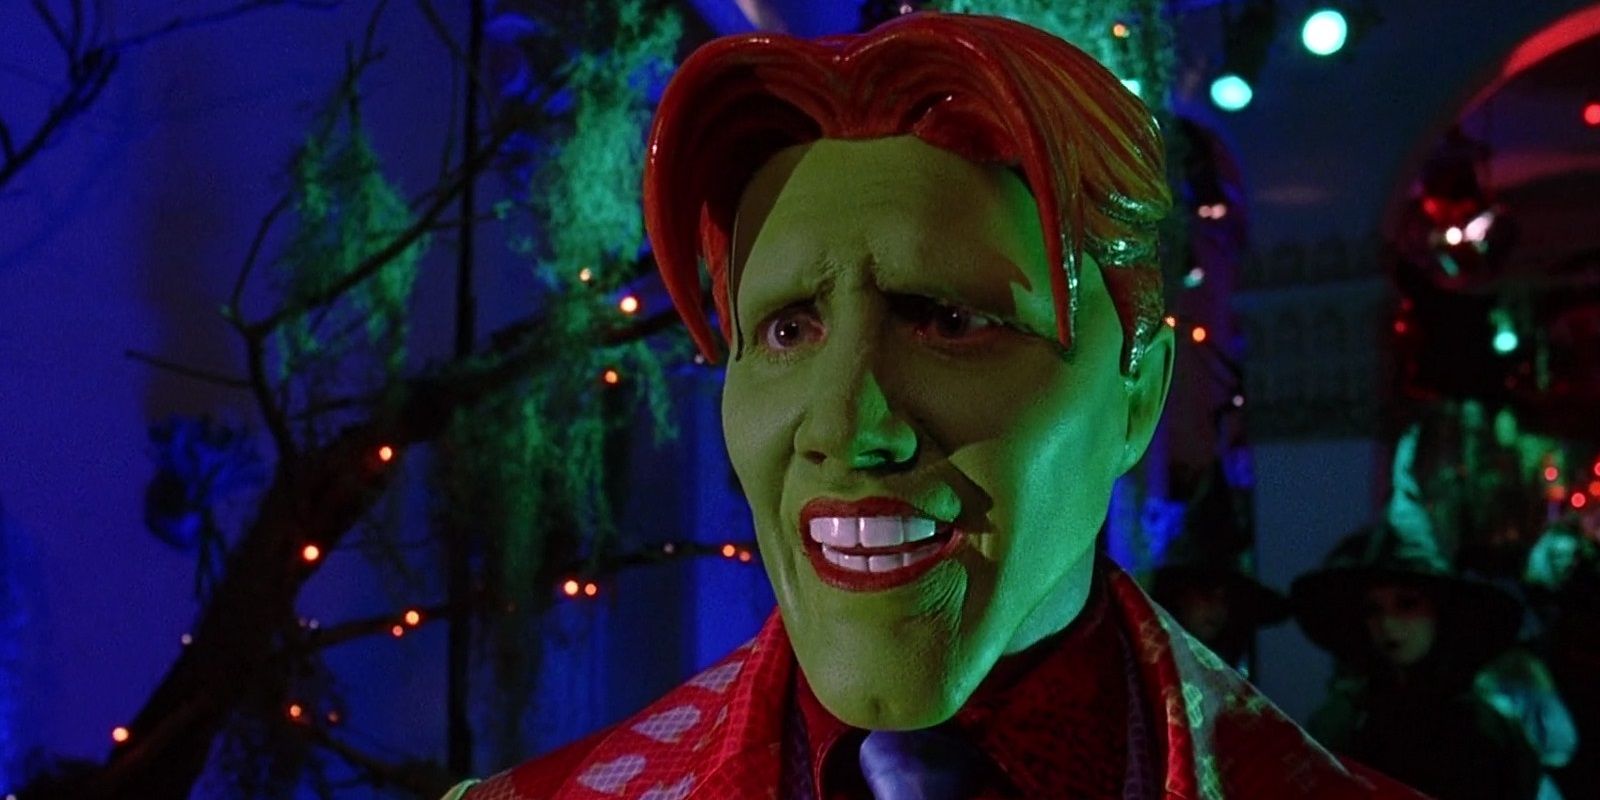 Jamie Kennedy as the new Mask in Son of the Mask